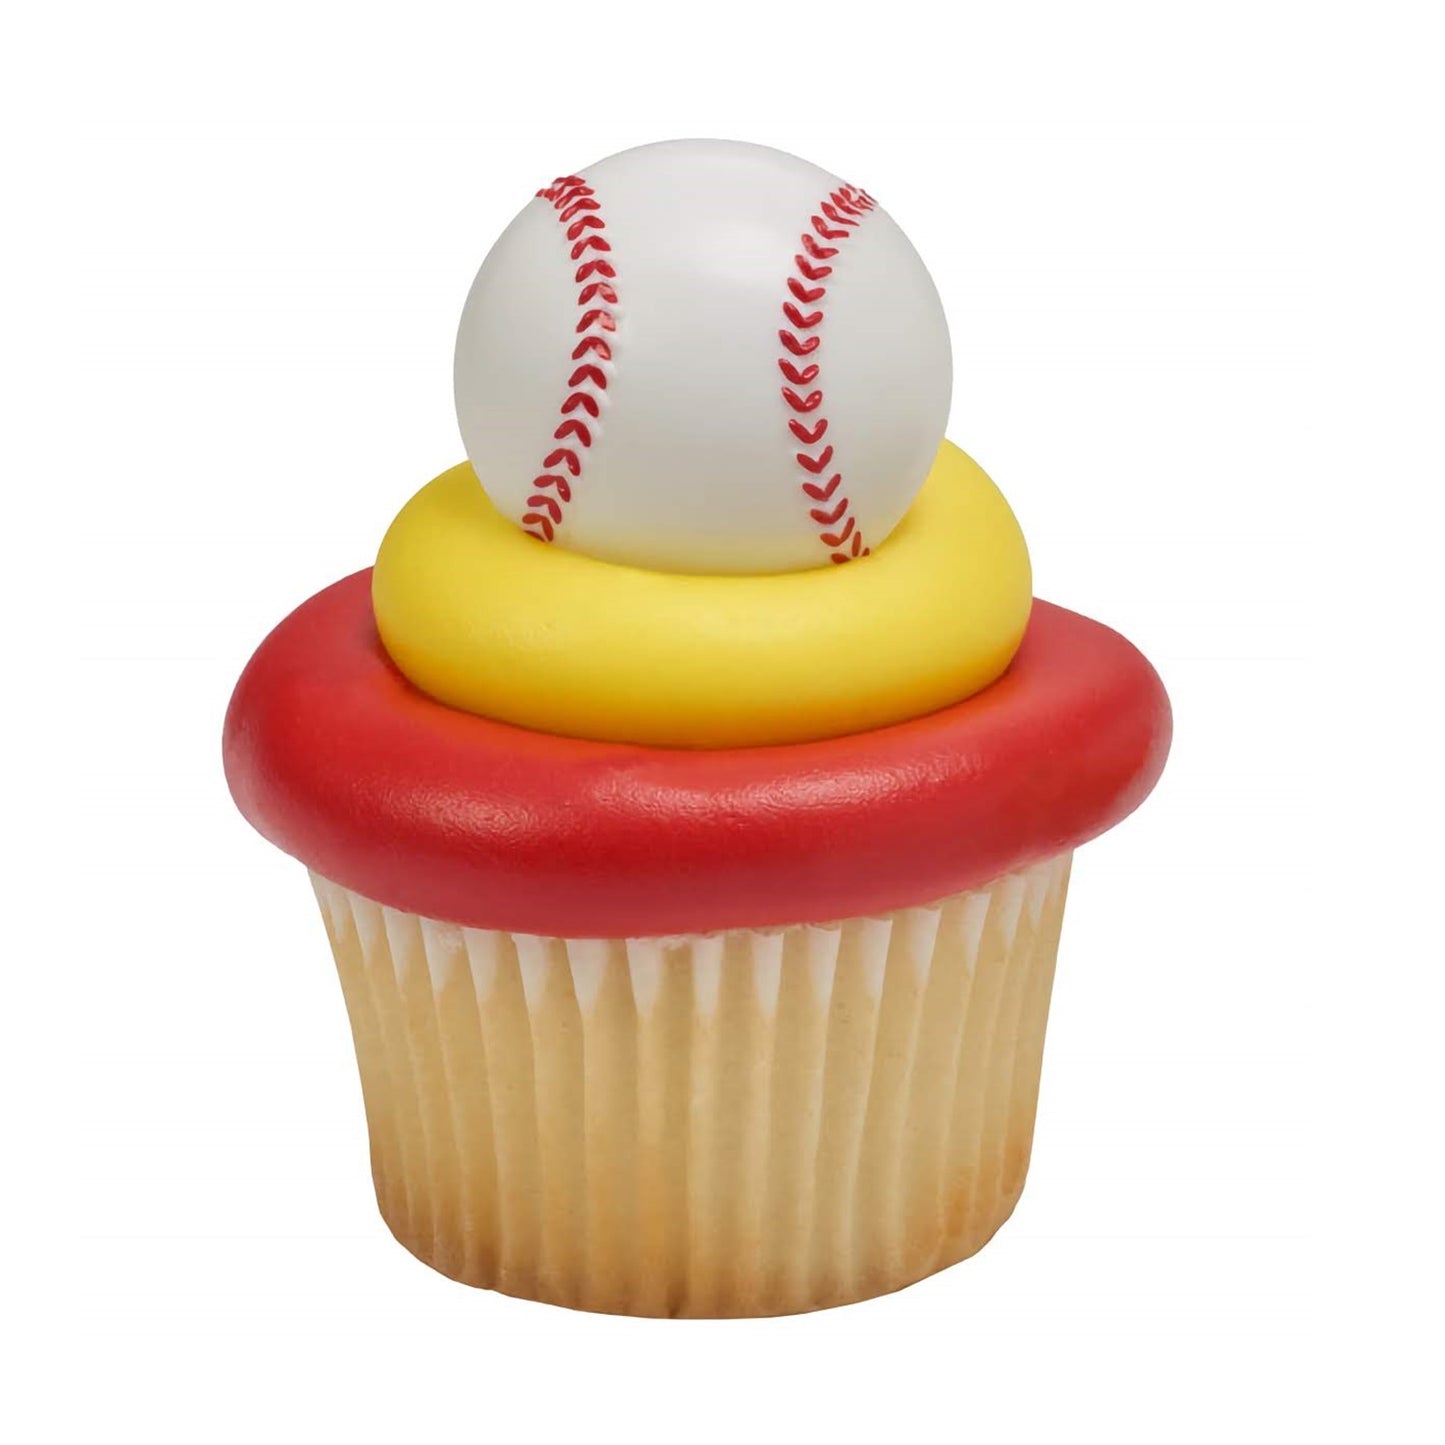 Pack of six baseball cupcake rings, each showcasing a classic white baseball with red seams, perfect for baseball game watch parties, team events, or sports-themed birthday parties.